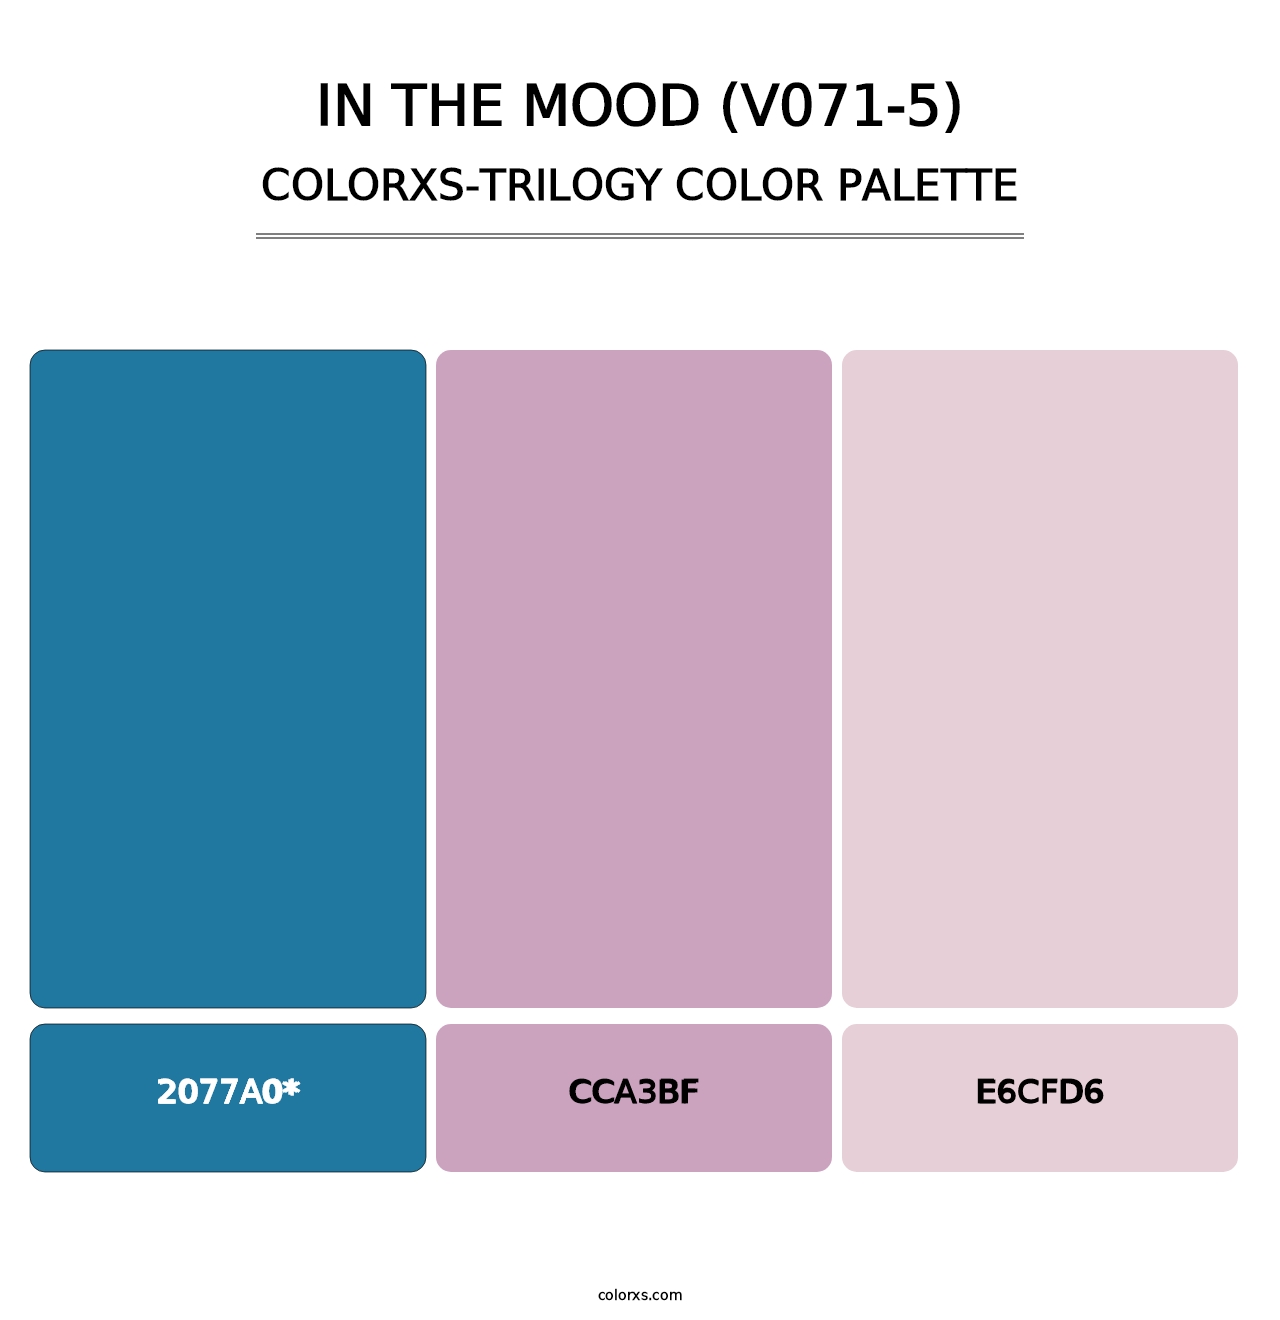 In the Mood (V071-5) - Colorxs Trilogy Palette